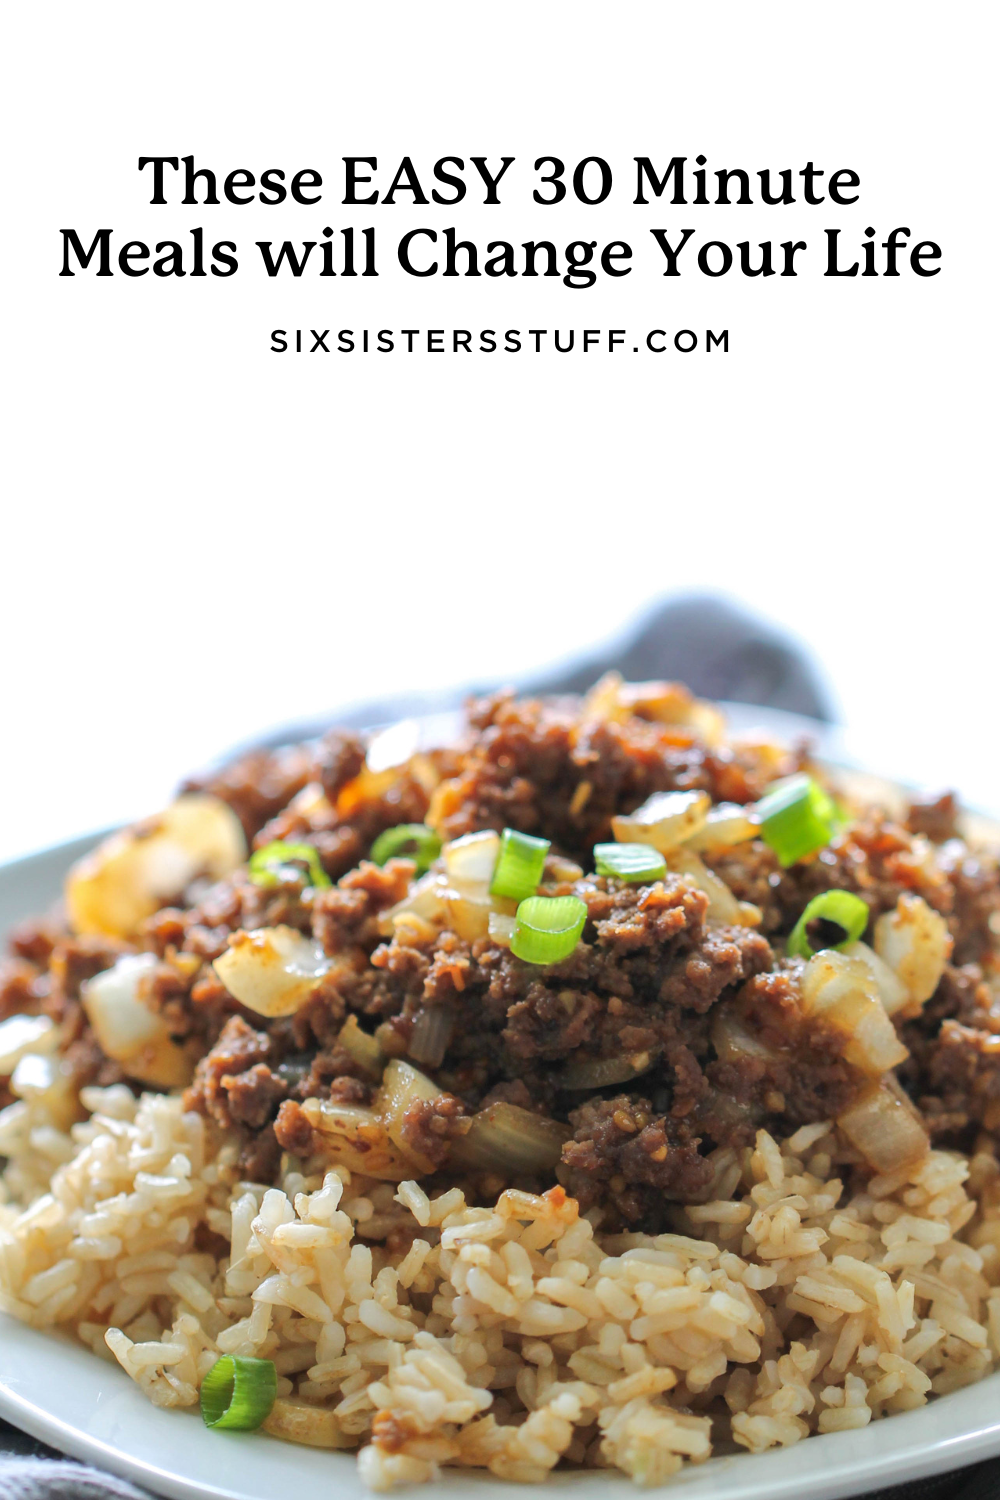 These EASY 30 Minute Meals will Change Your Life